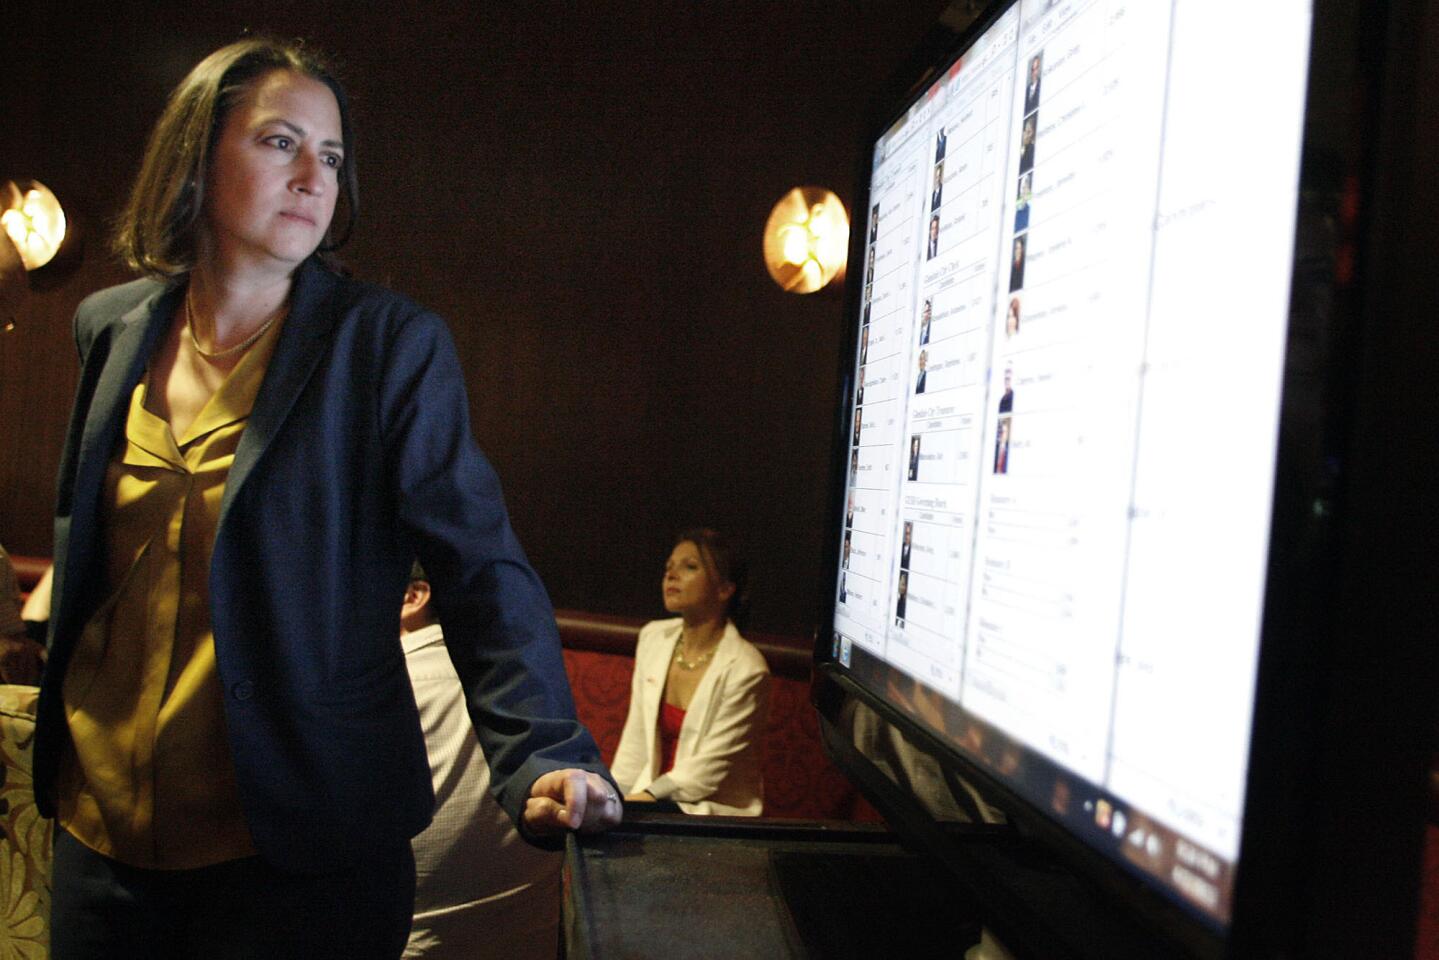 City Council Member Laura Friedman watches the results on a screen during election night, which took place at Embassy Suites in Glendale on Tuesday, April 2, 2013.